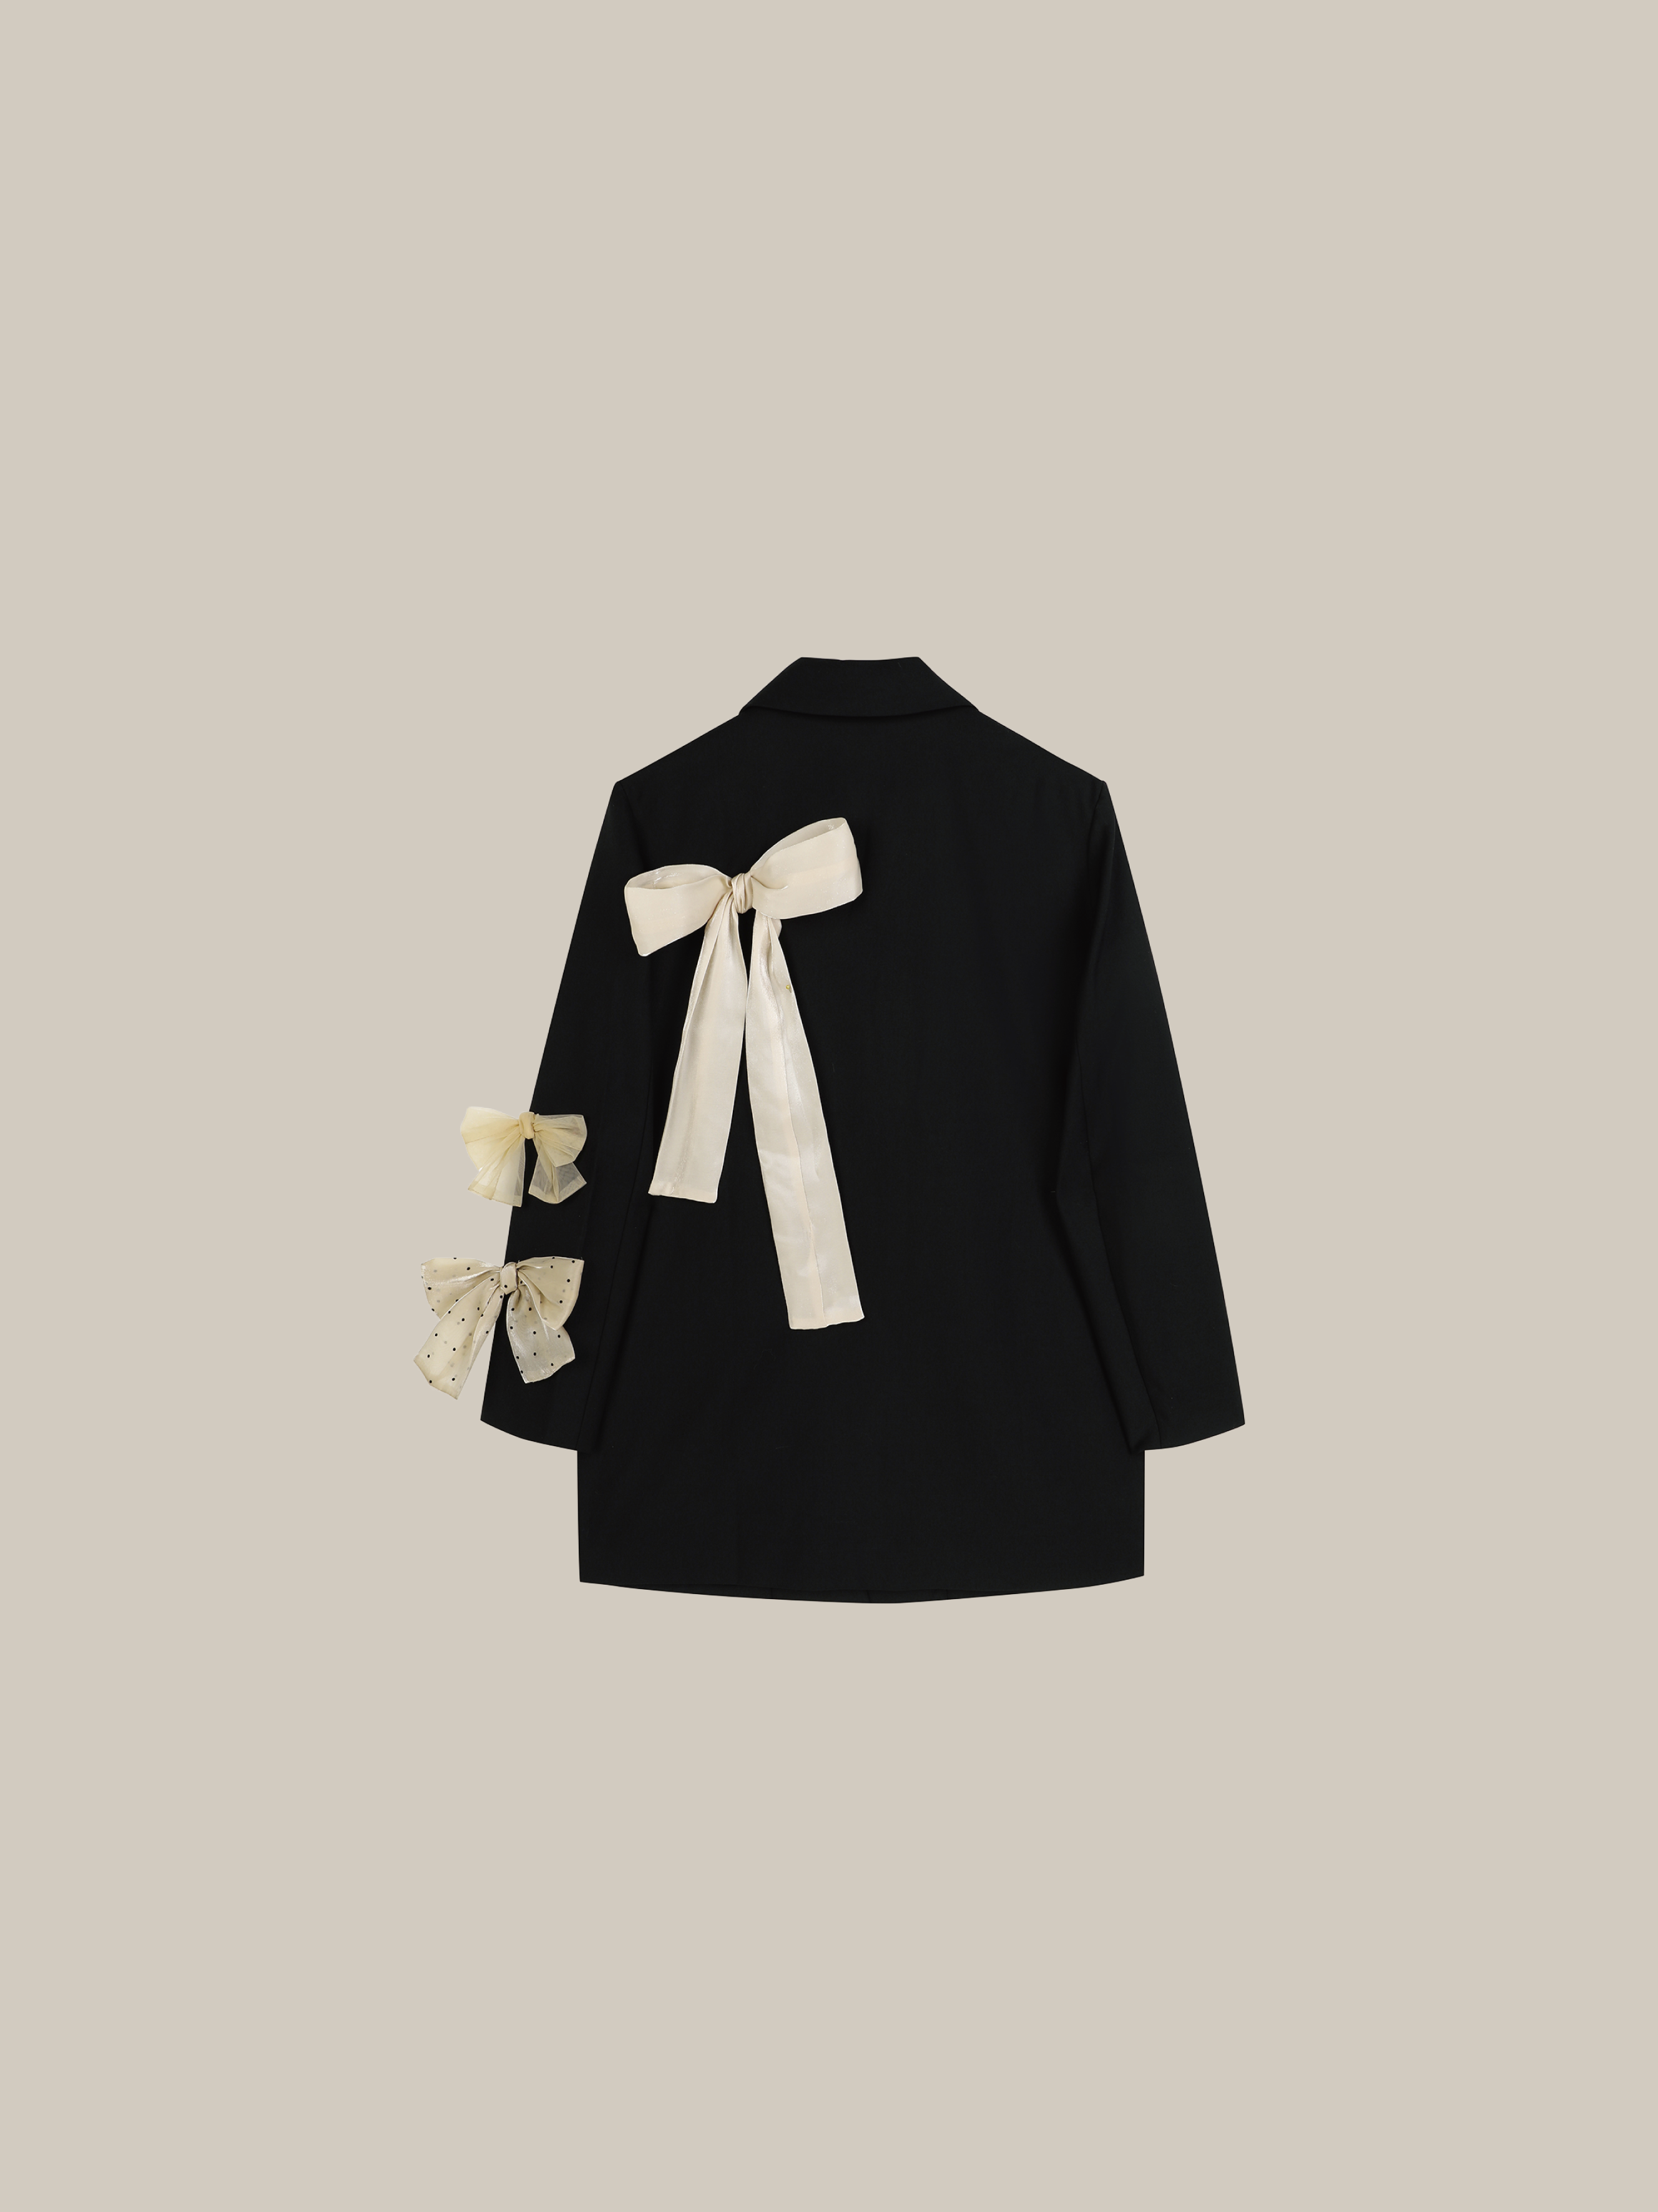 Ribbon Attacthed Black Jacket -- out of stock